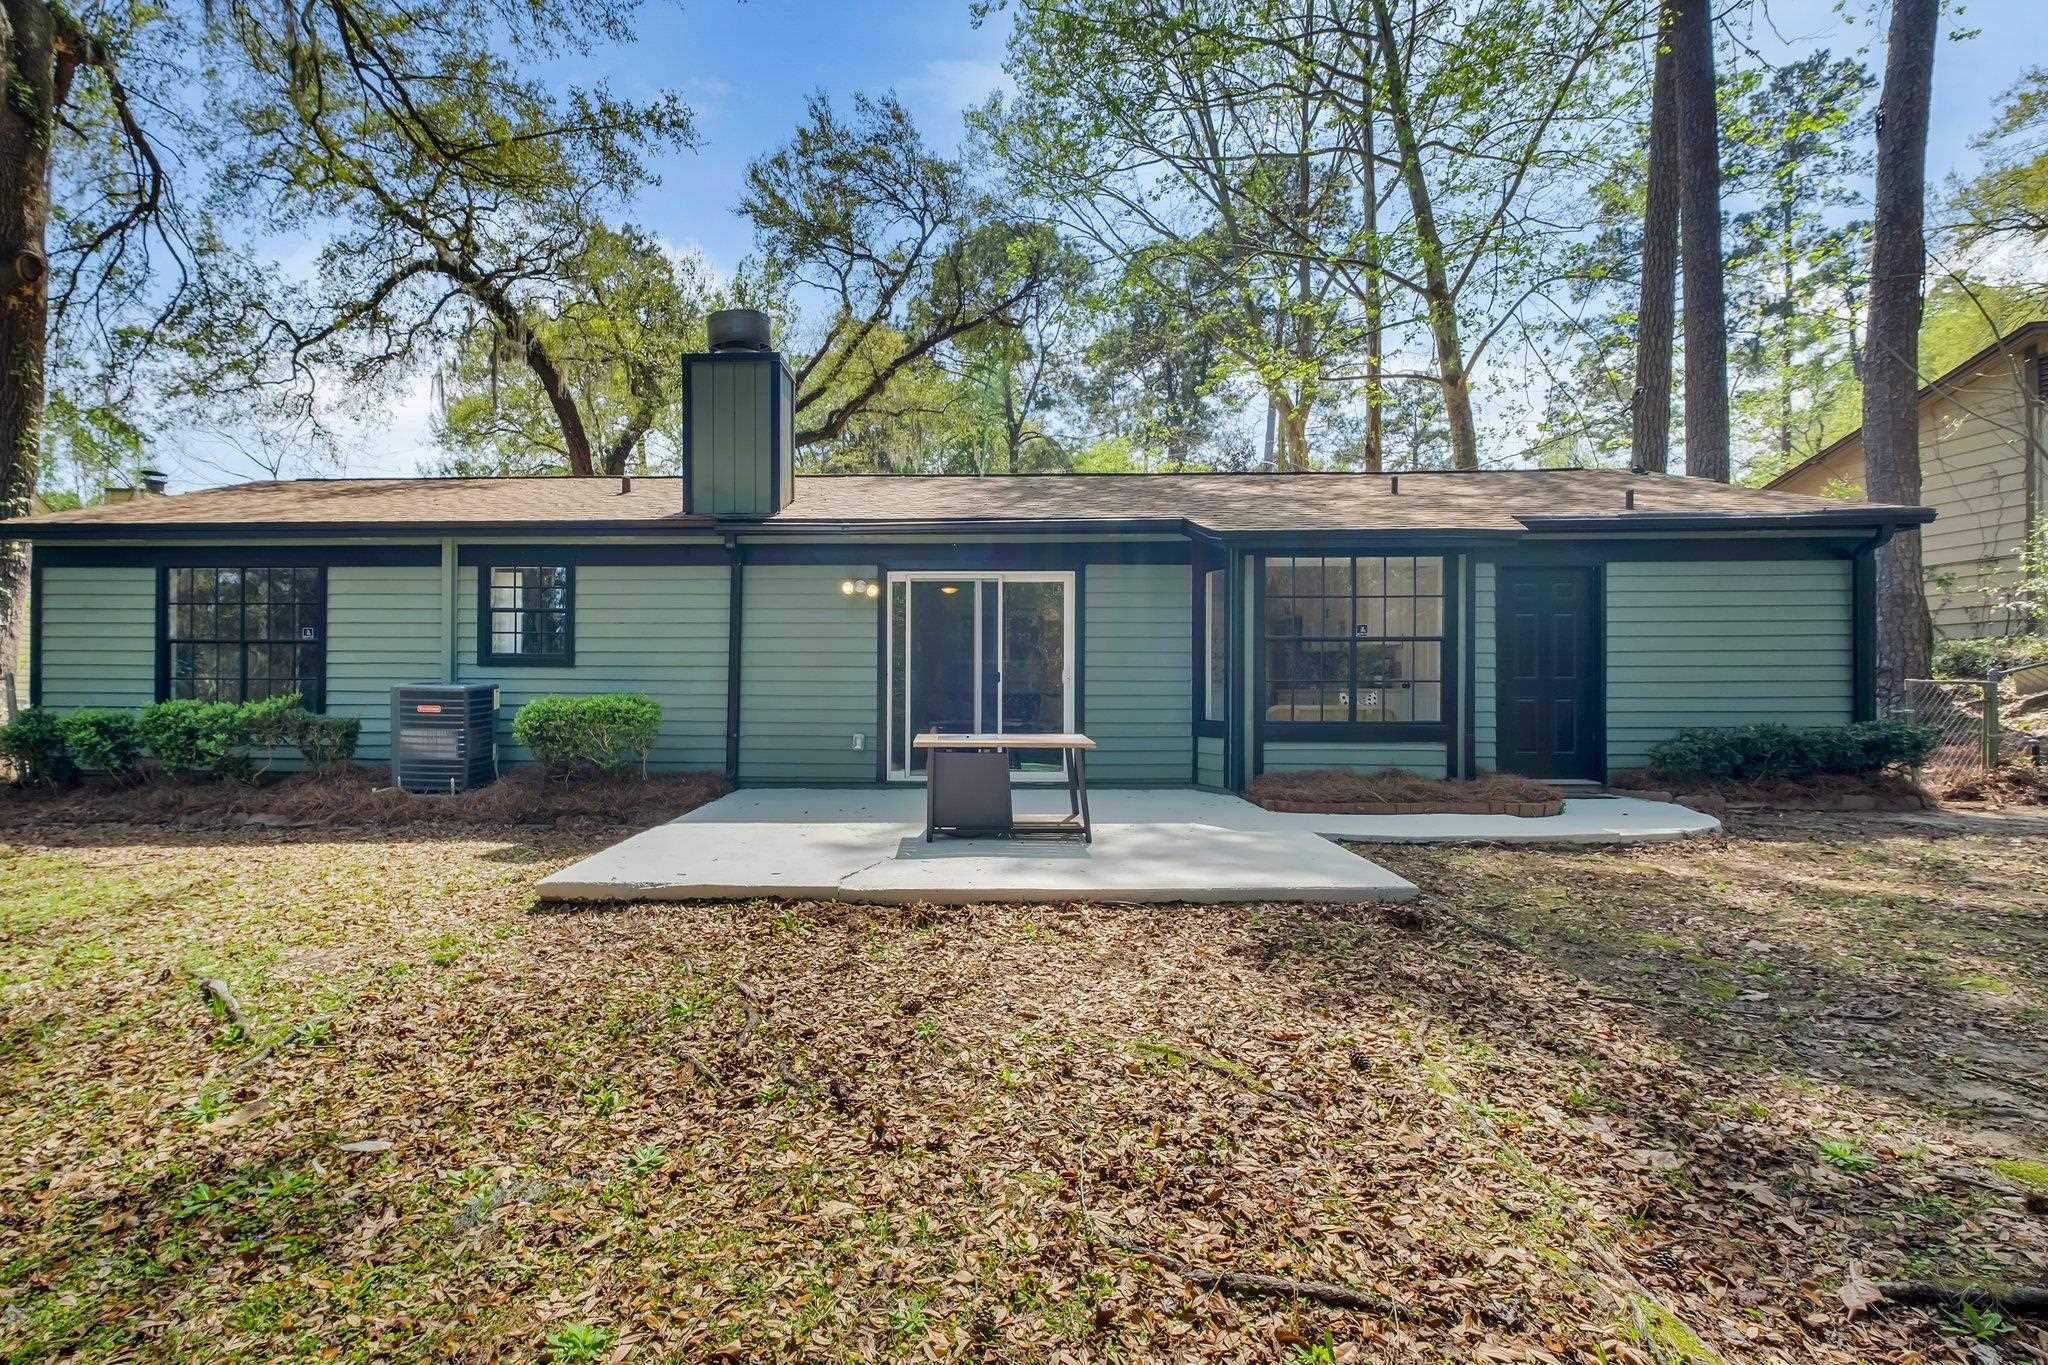 2062 Darnell Circle,TALLAHASSEE,Florida 32303,3 Bedrooms Bedrooms,2 BathroomsBathrooms,Detached single family,2062 Darnell Circle,369693